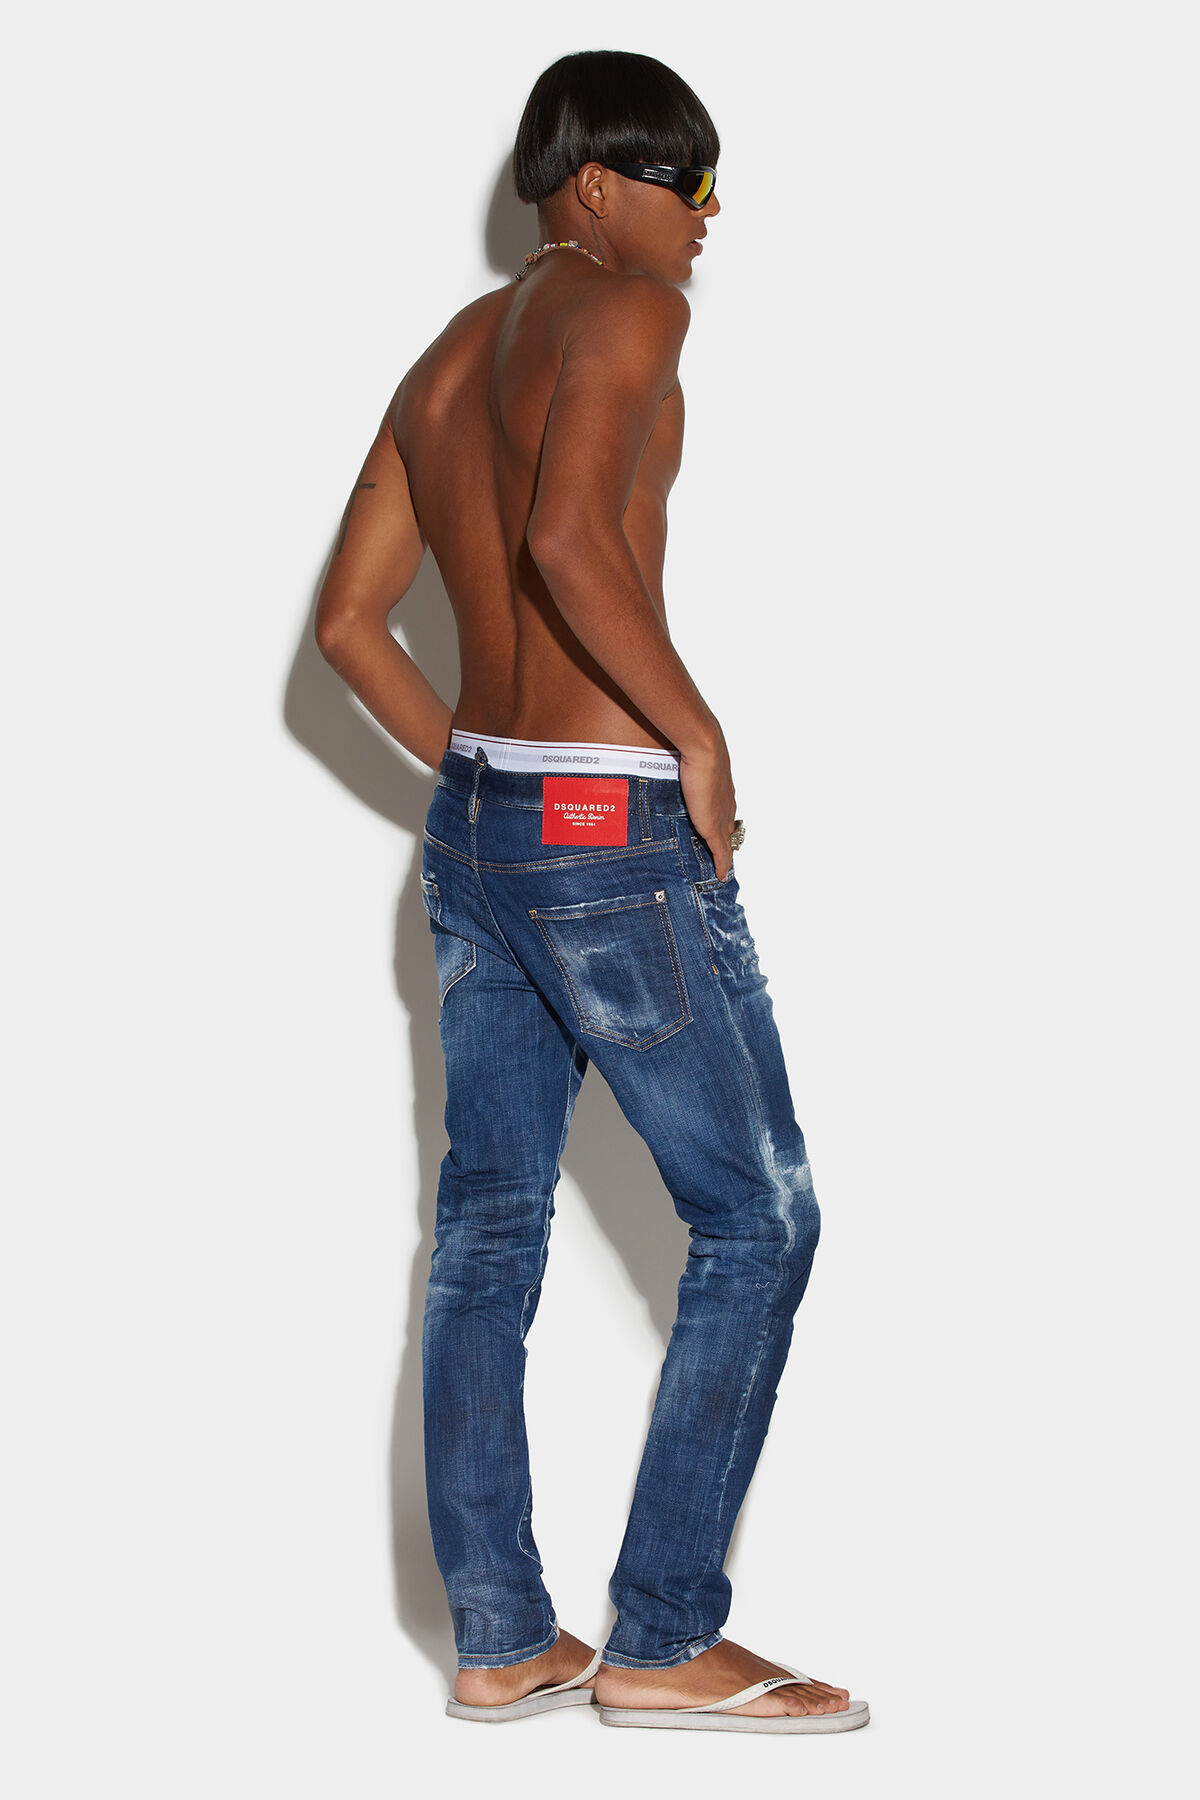 DSQUARED2 Jeans Cool Guy in Washed Dark Blue Destroyed 48